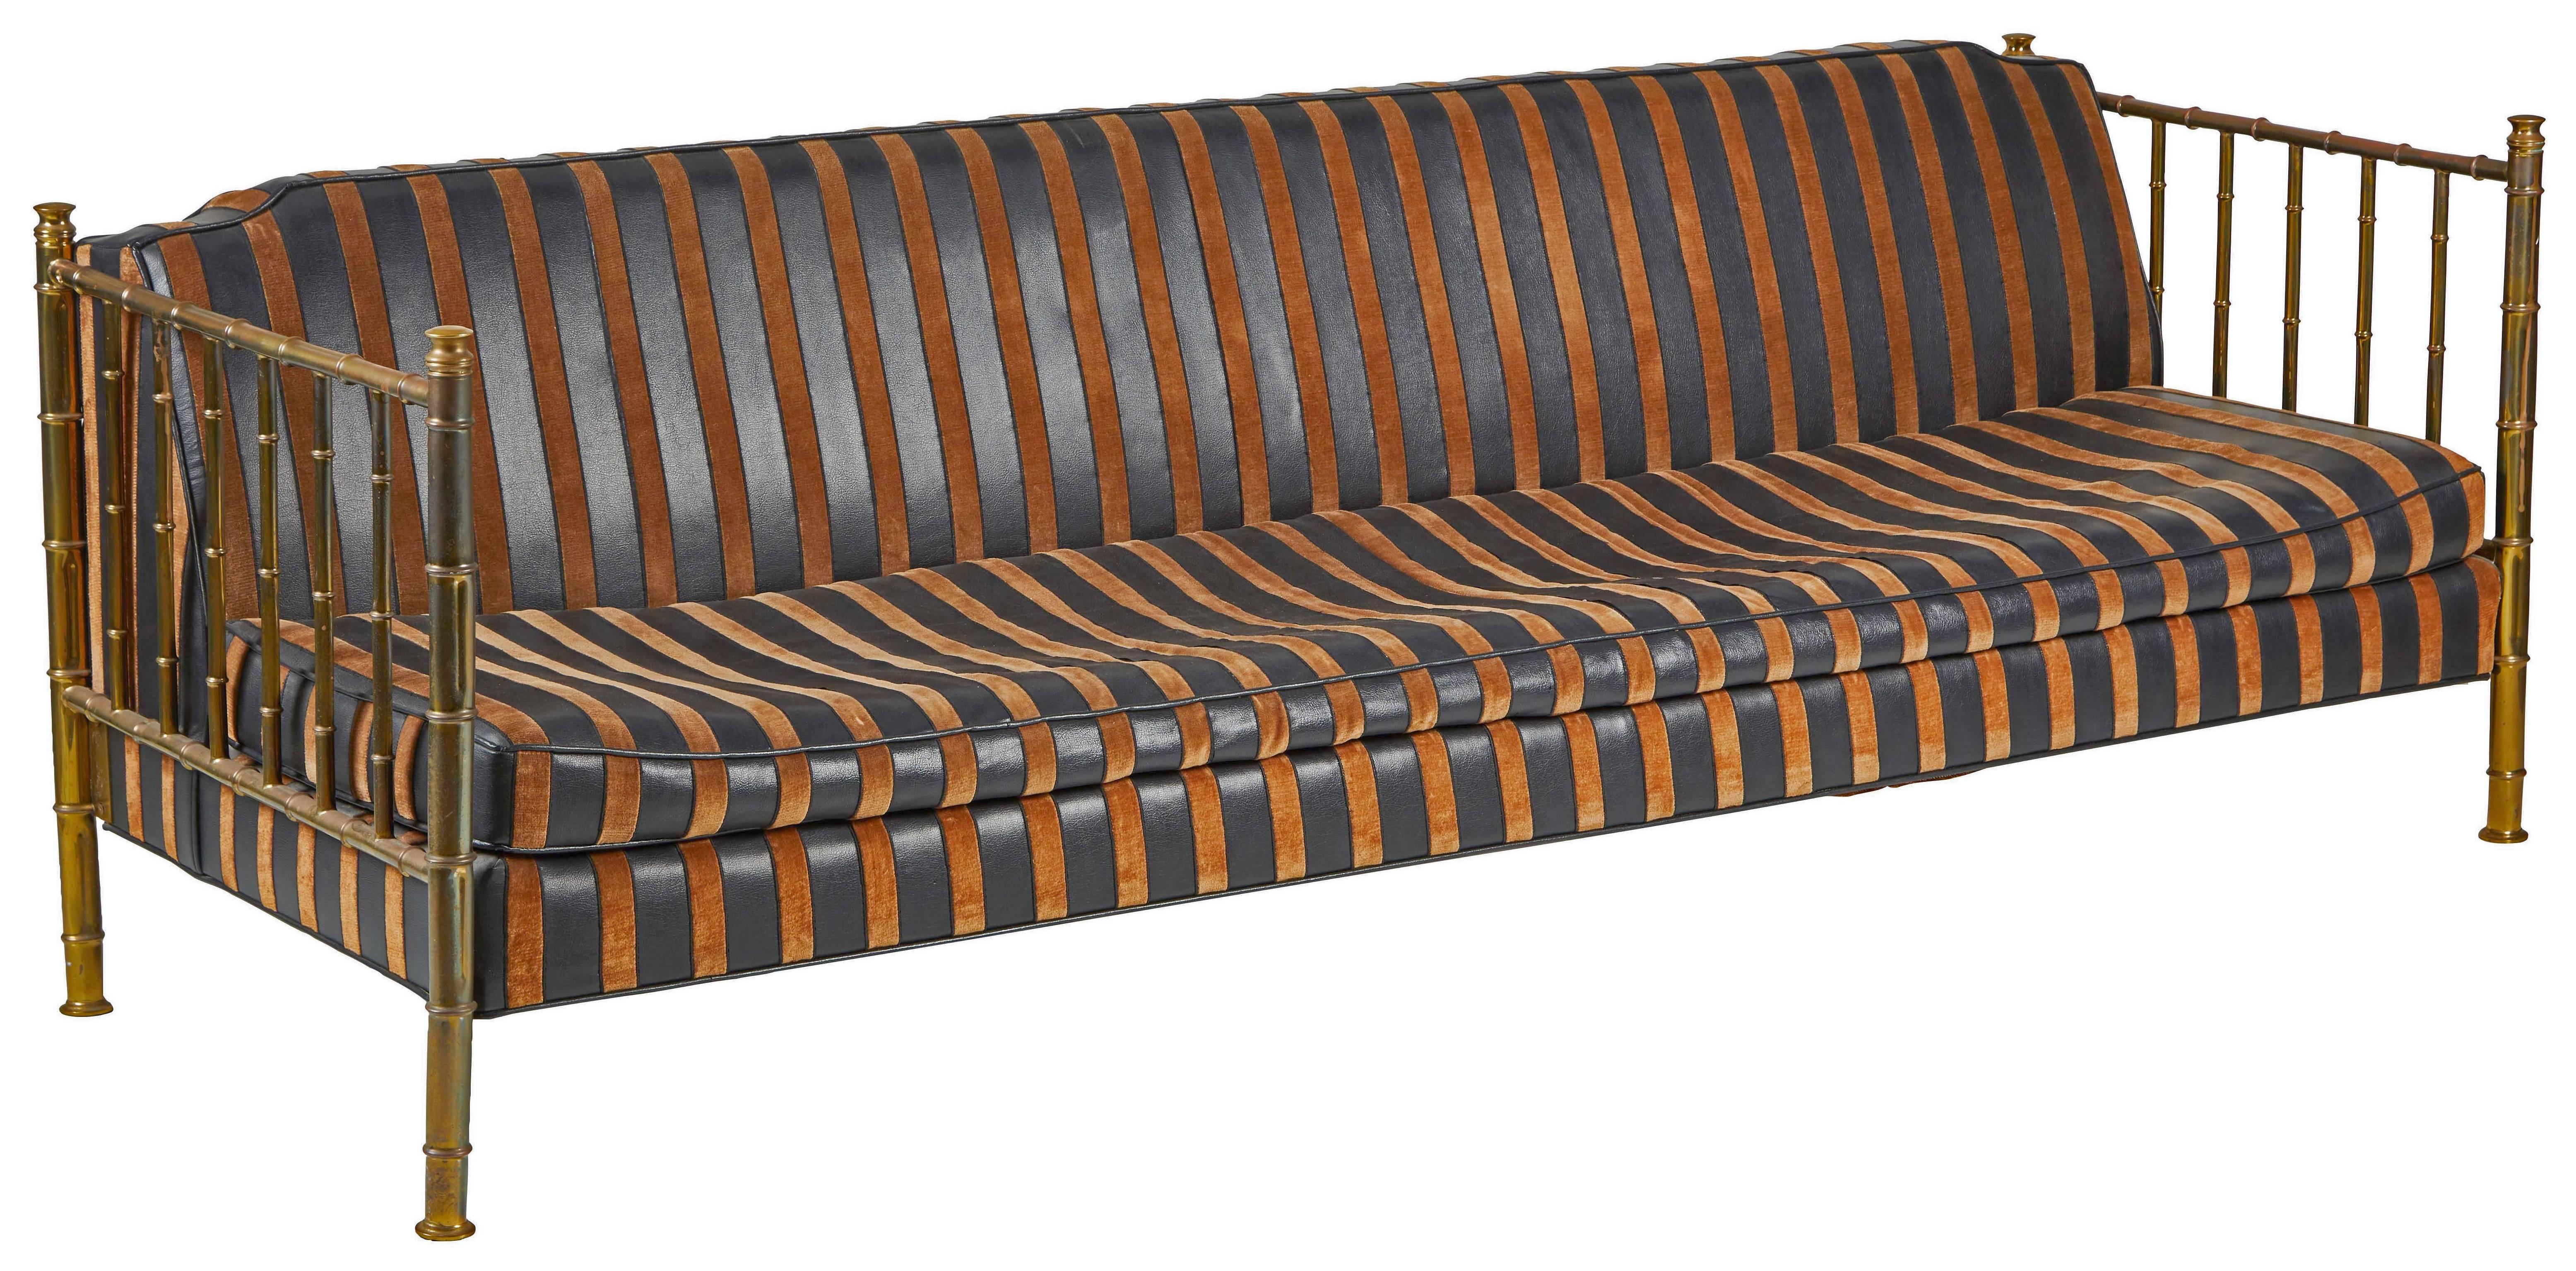 A fantastic brass, faux bamboo sofa by Mastercraft.  Nearly 8' in length, a striking, highly decorative piece wearing the original black/copper-striped leatherette/velvet upholstery.  Including two original, tufted bolster pillows.  Wonderful patina